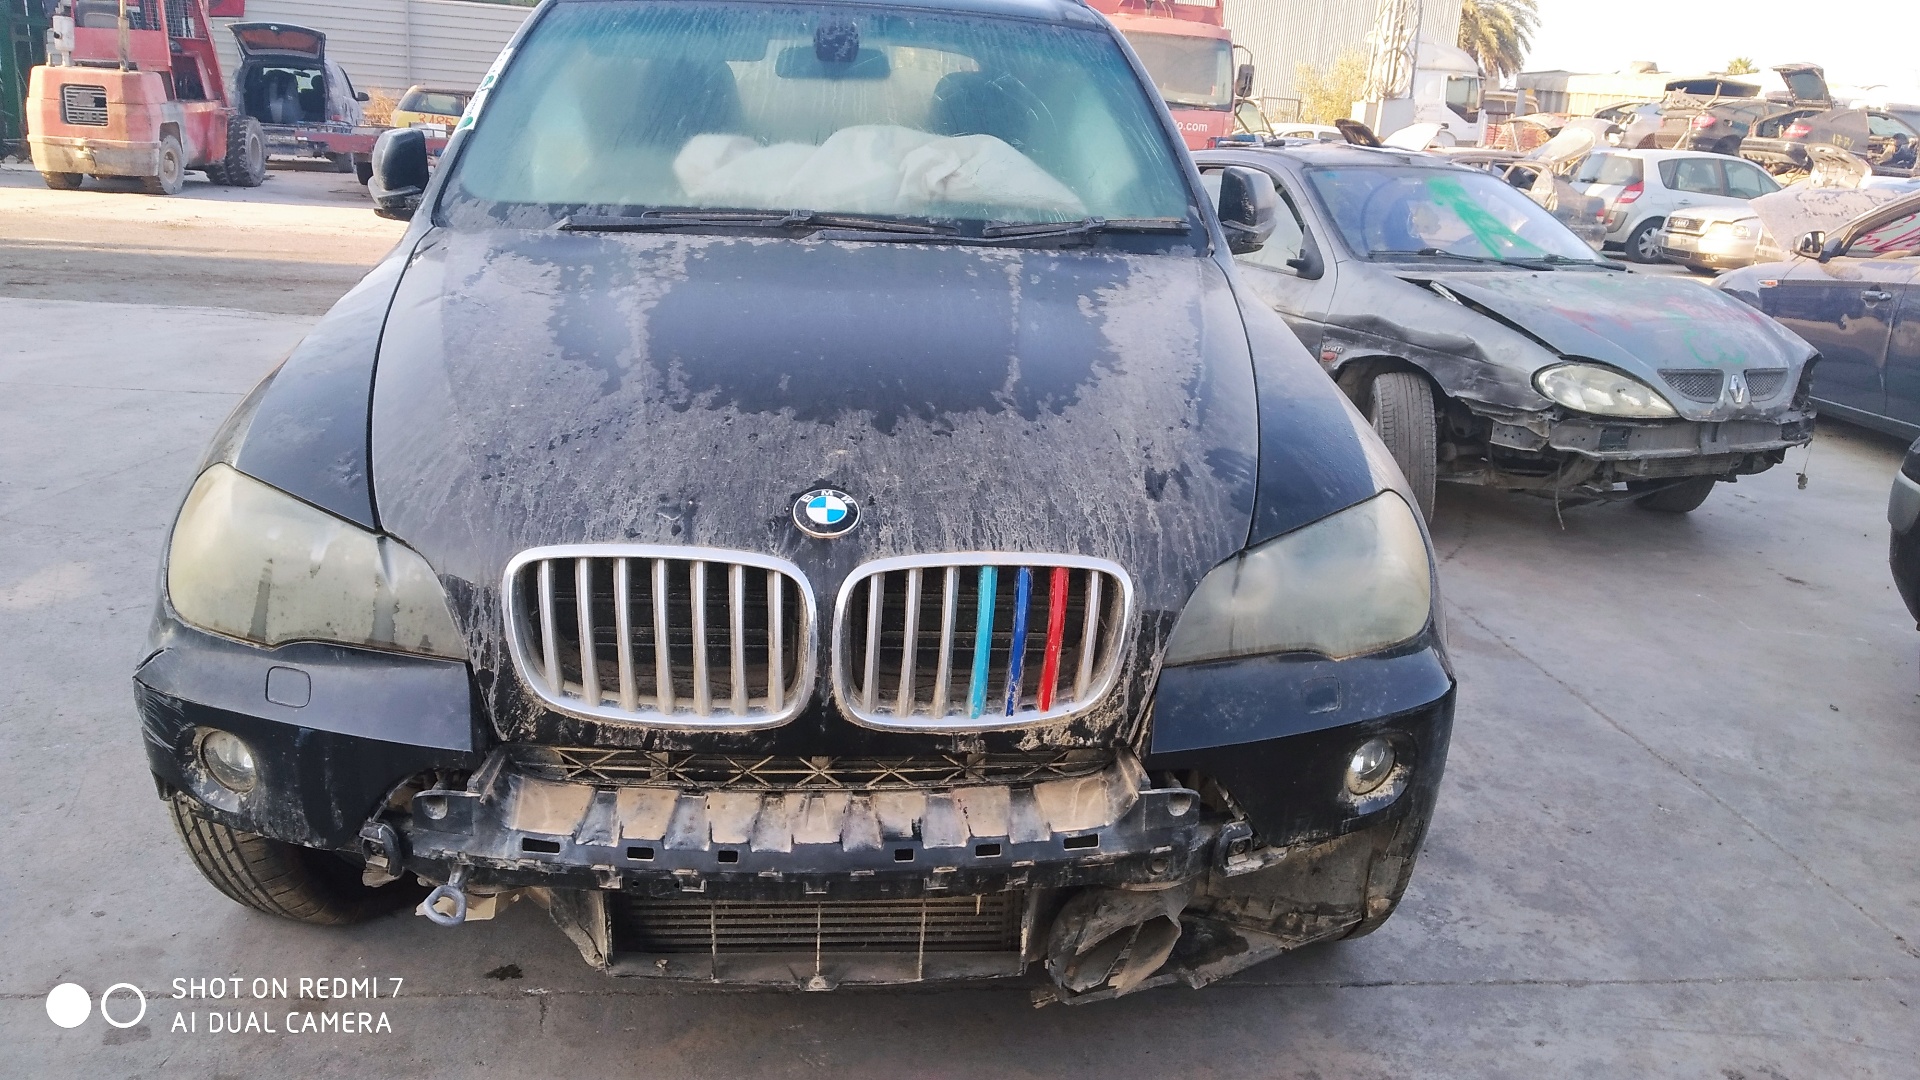 BMW X5 E70 (2006-2013) Front Left Inner Arch Liner 24913981